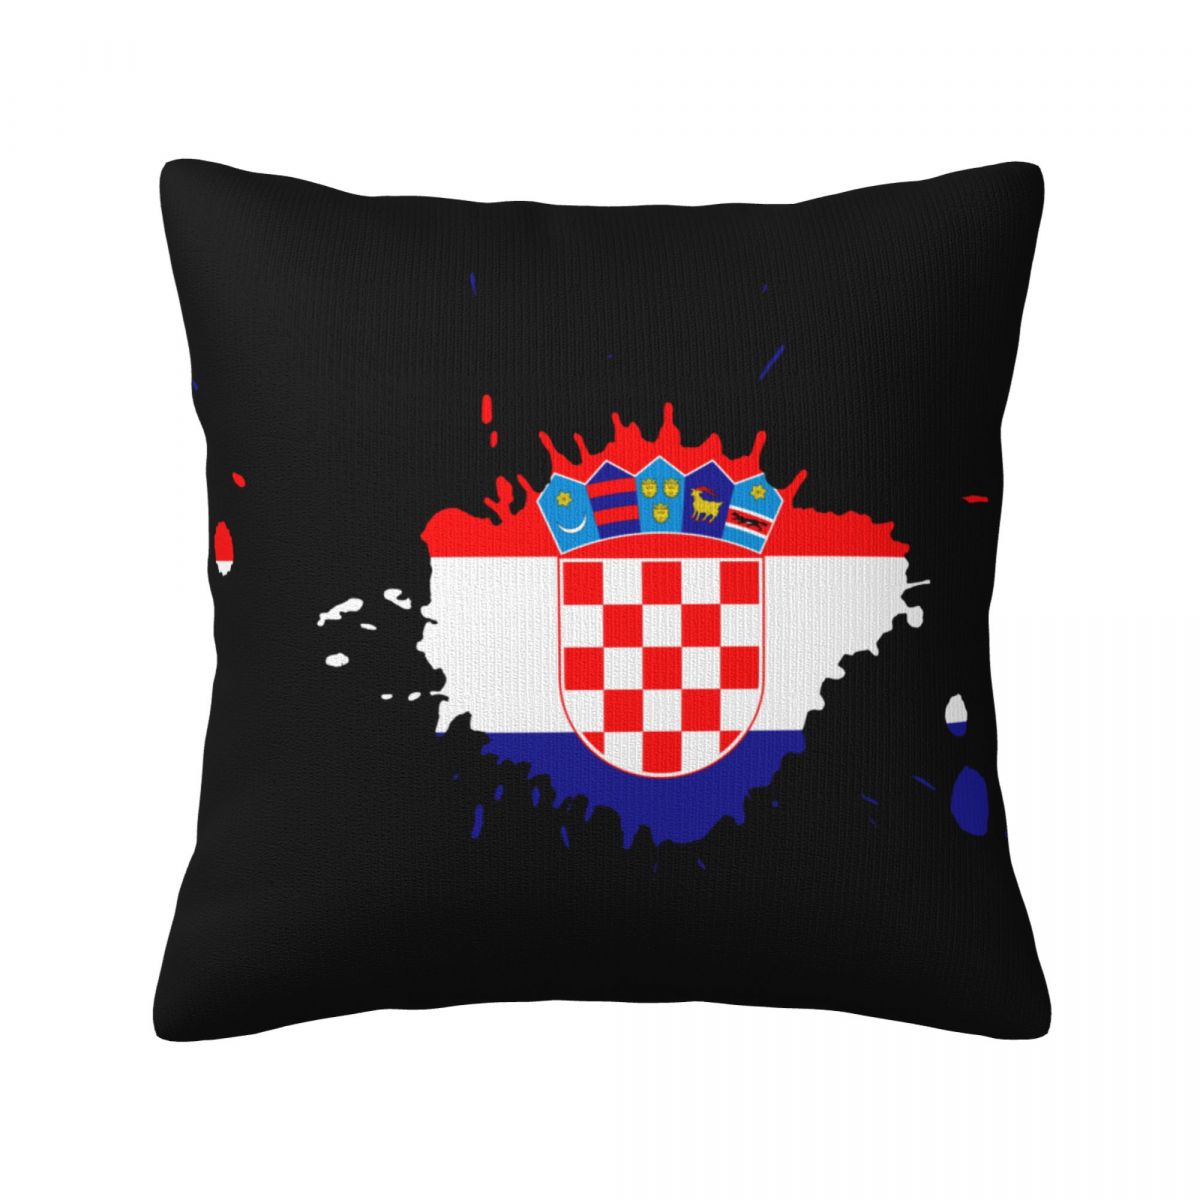 Croatia Ink Spatter Decorative Square Throw Pillow Covers